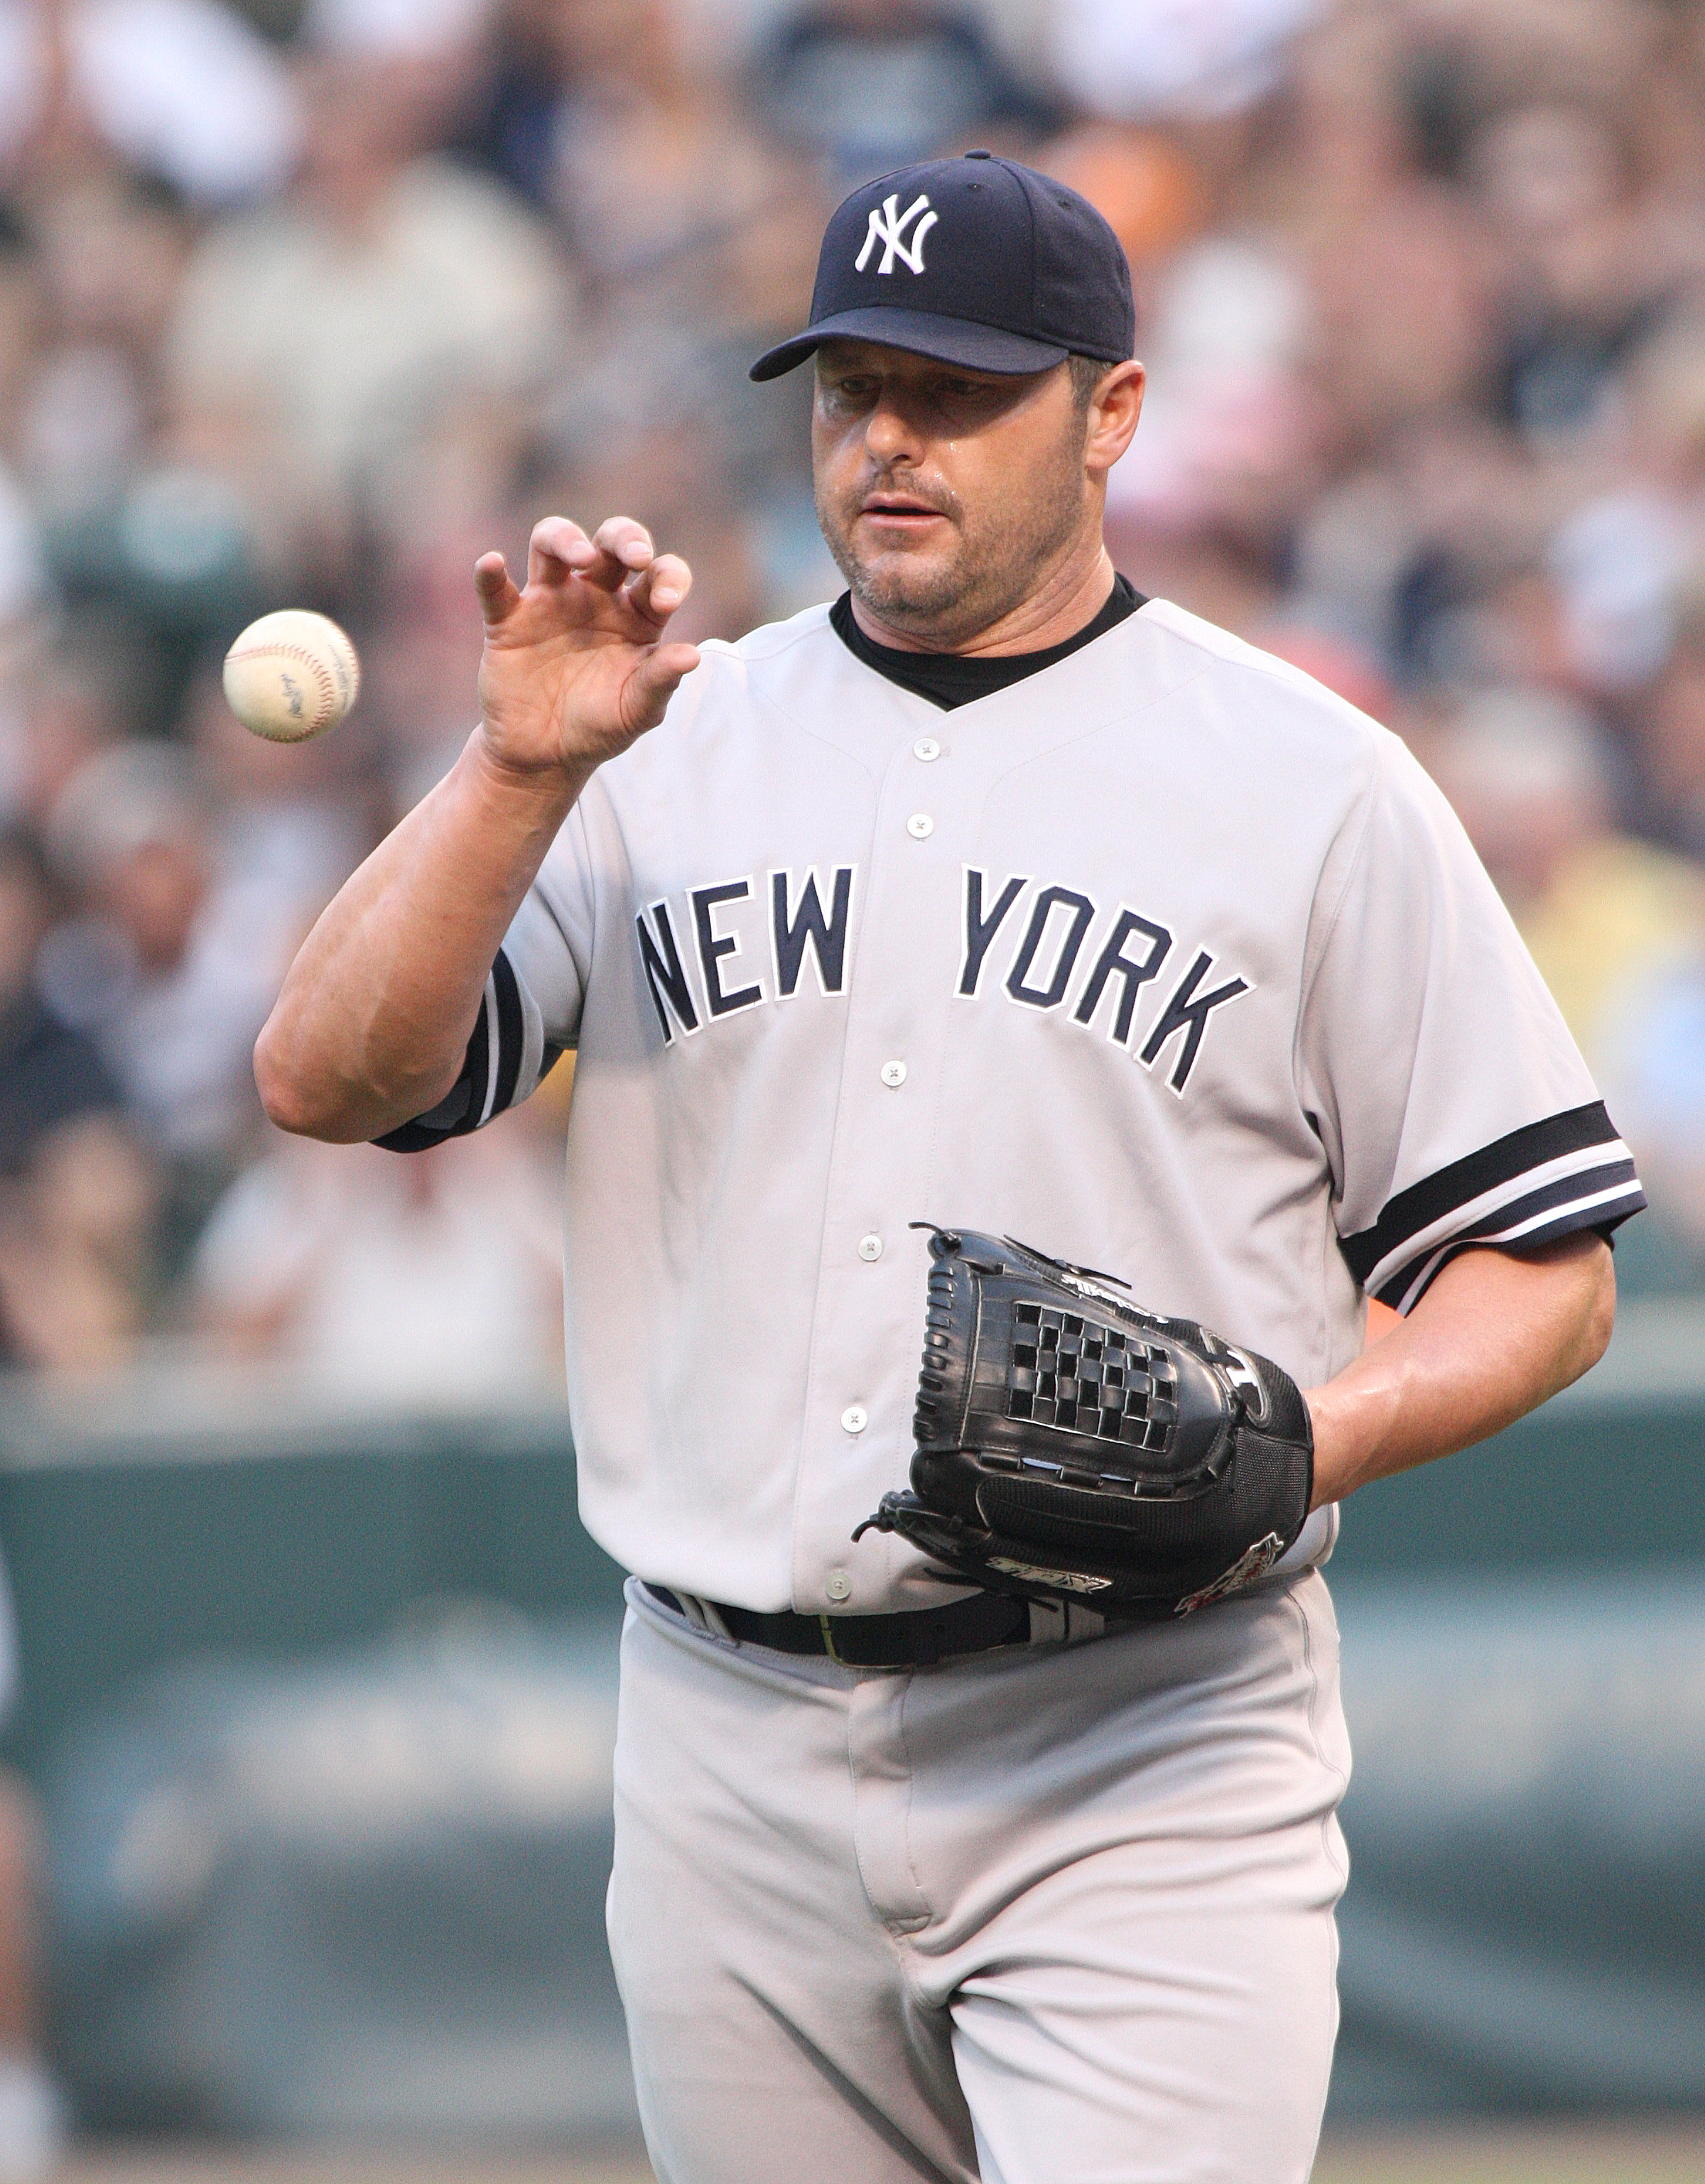 Roger Clemens pic